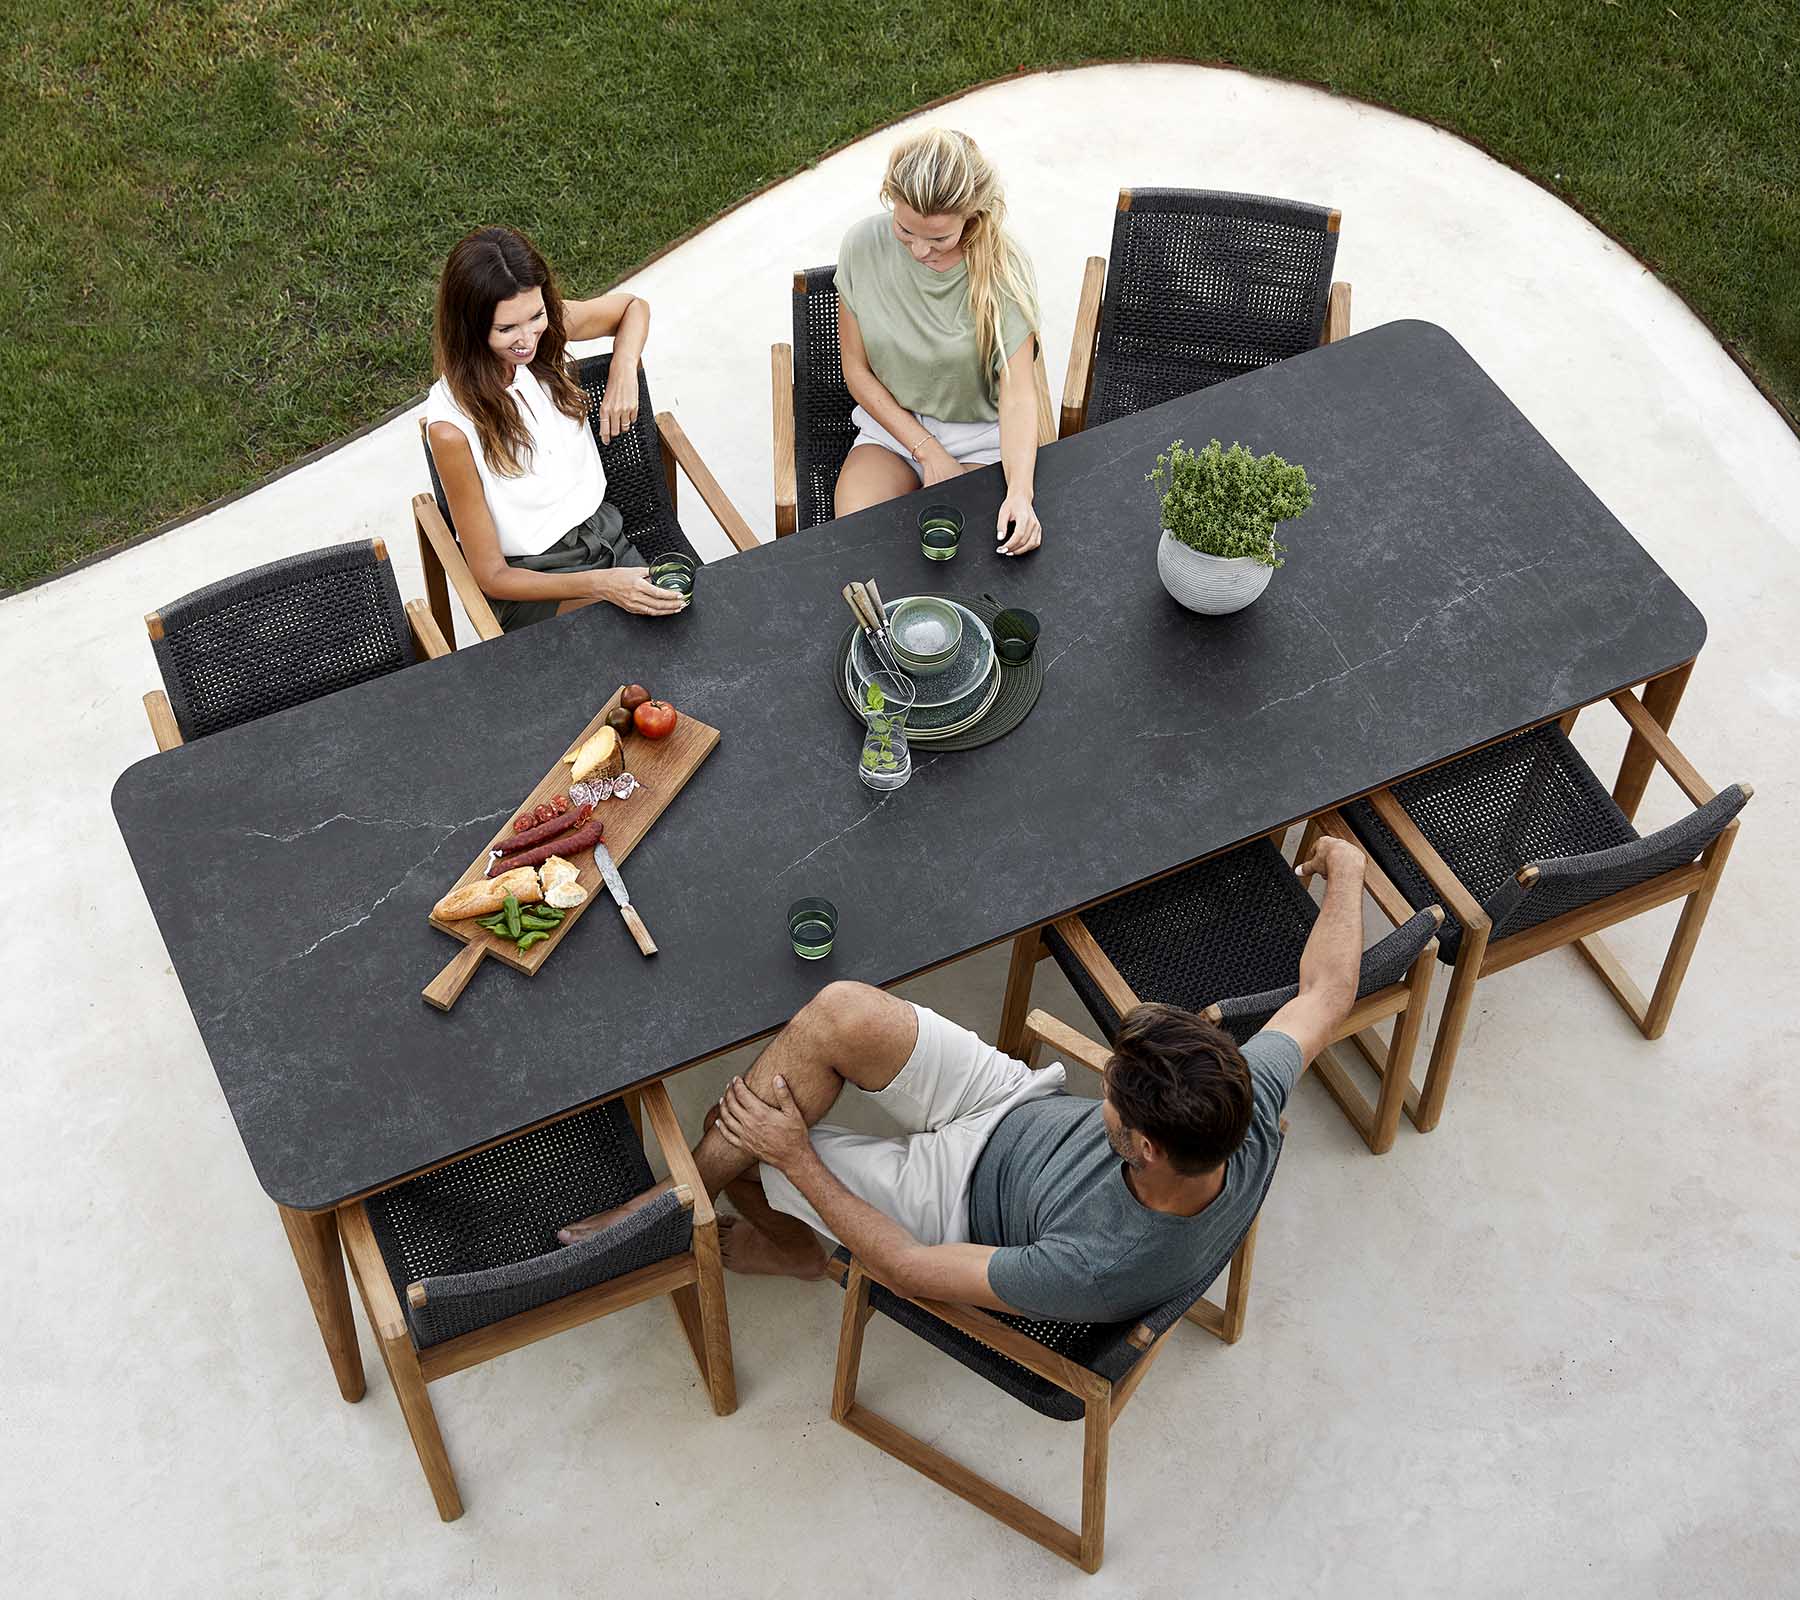 Boxhill's Endless Outdoor Dining Armchair lifestyle image with dining table and 3 people sitting down